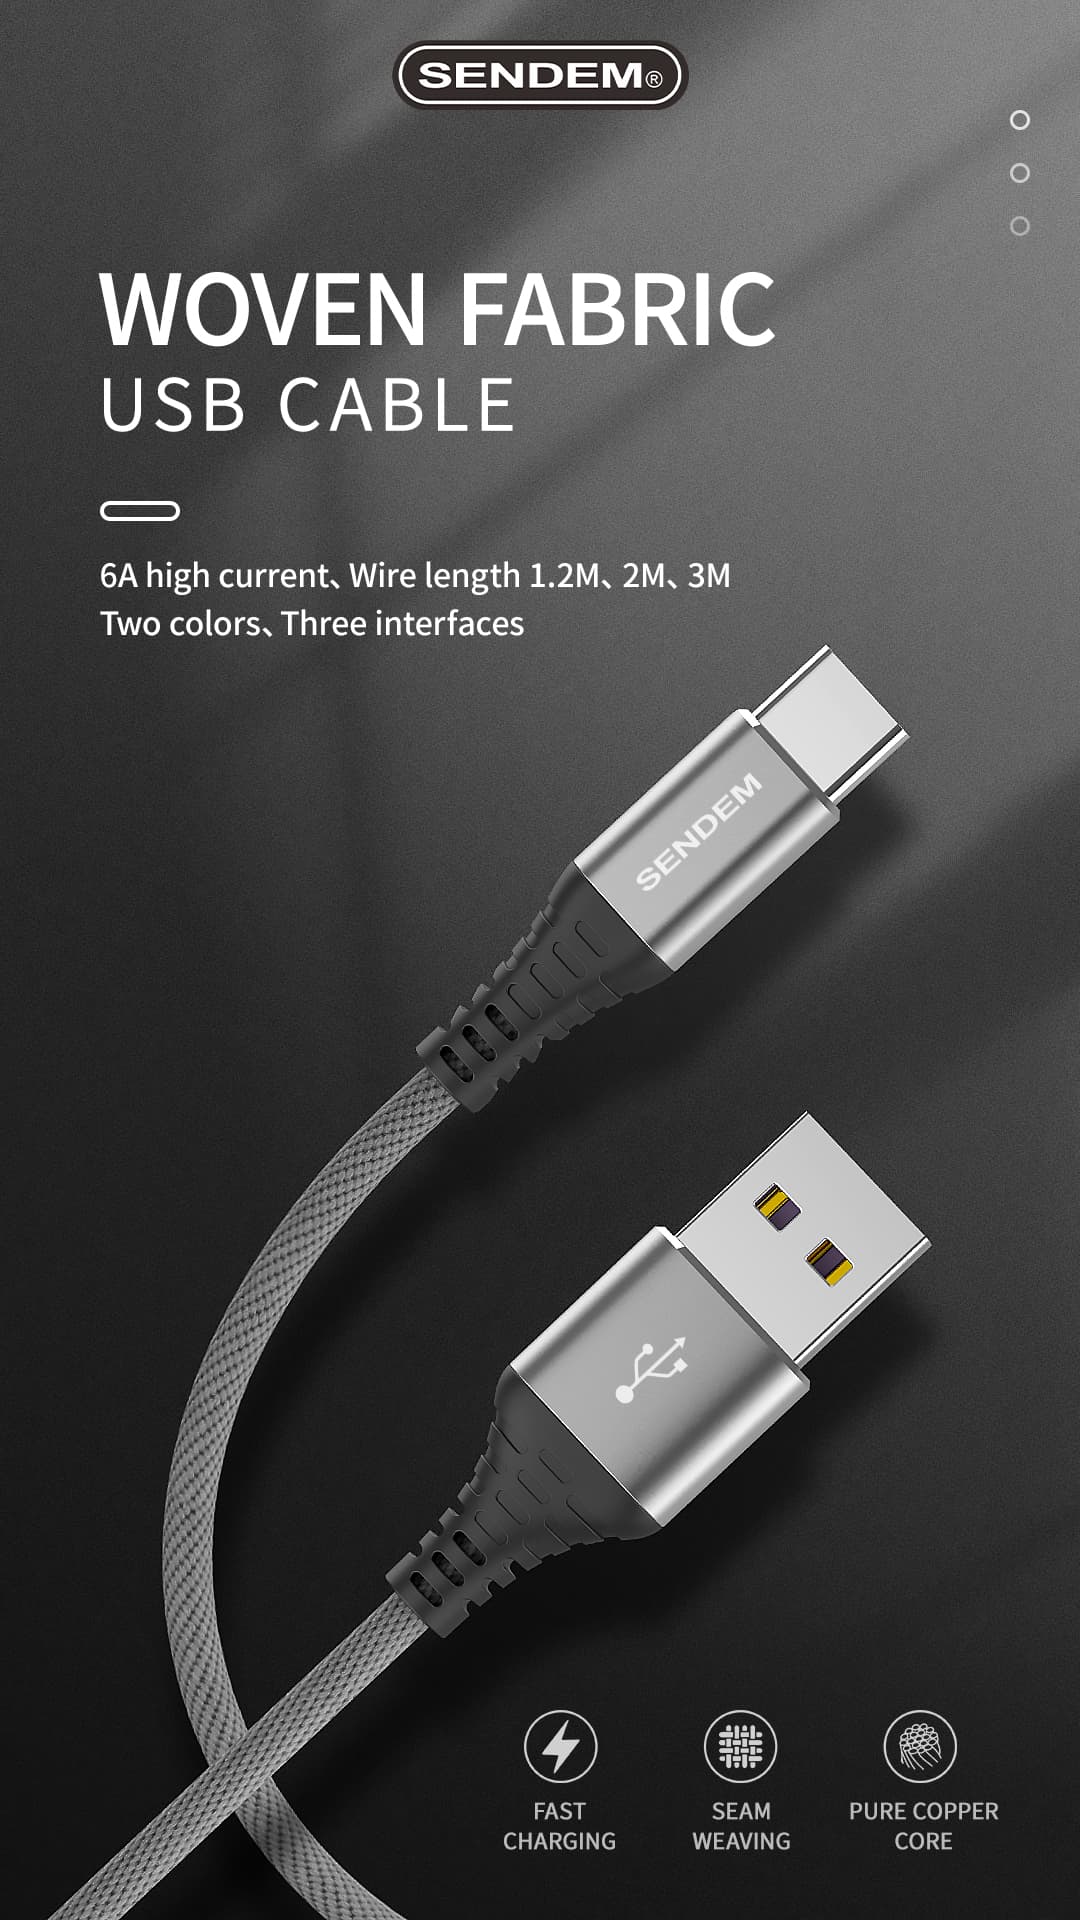 M11S-M12S-M13S -maro tidcan 6A cable USB (1)